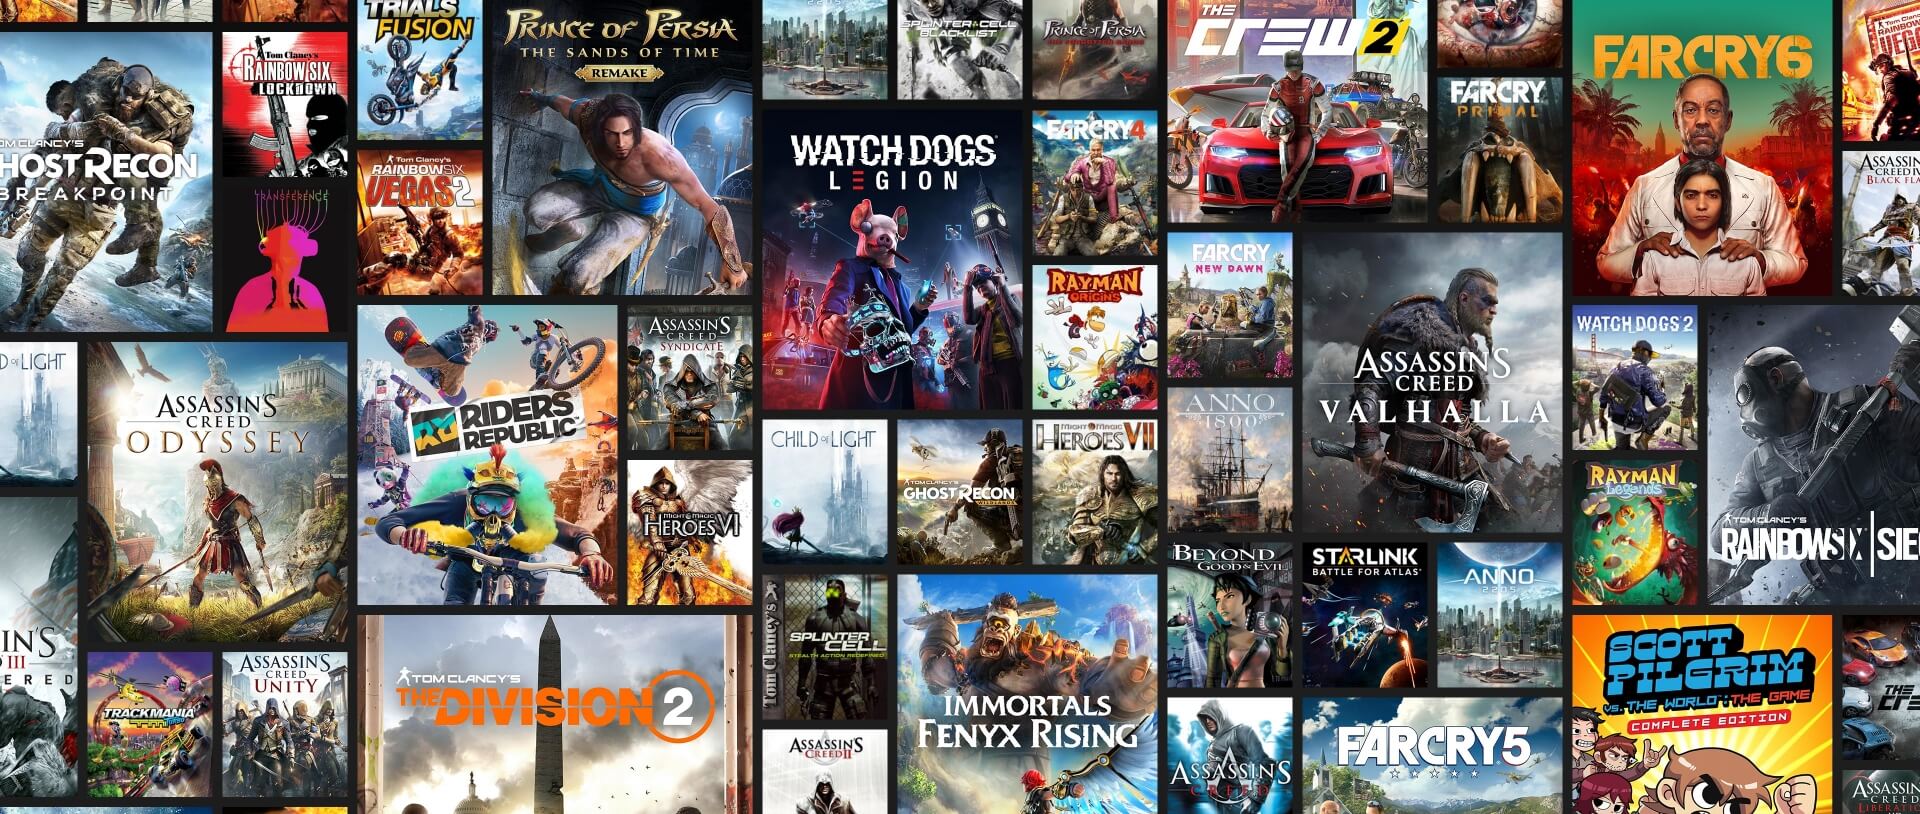 list of games on game pass for xbox